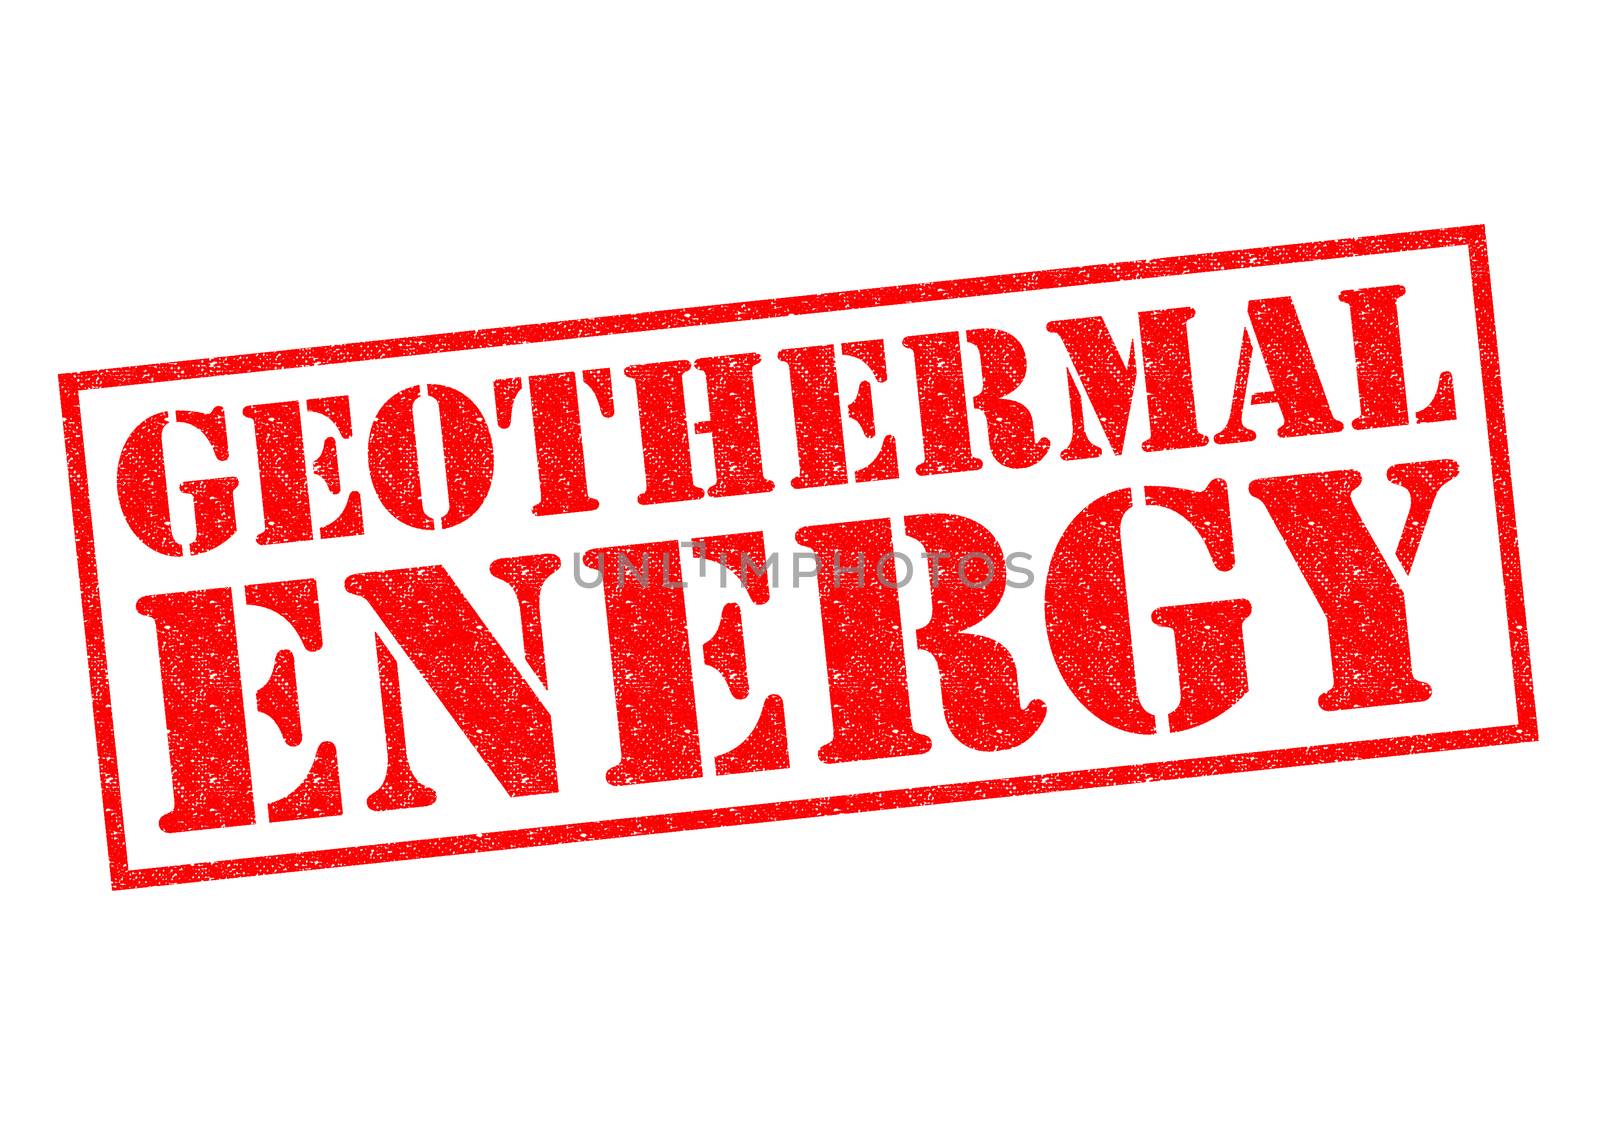 GEOTHERMAL ENERGY red Rubber Stamp over a white background.